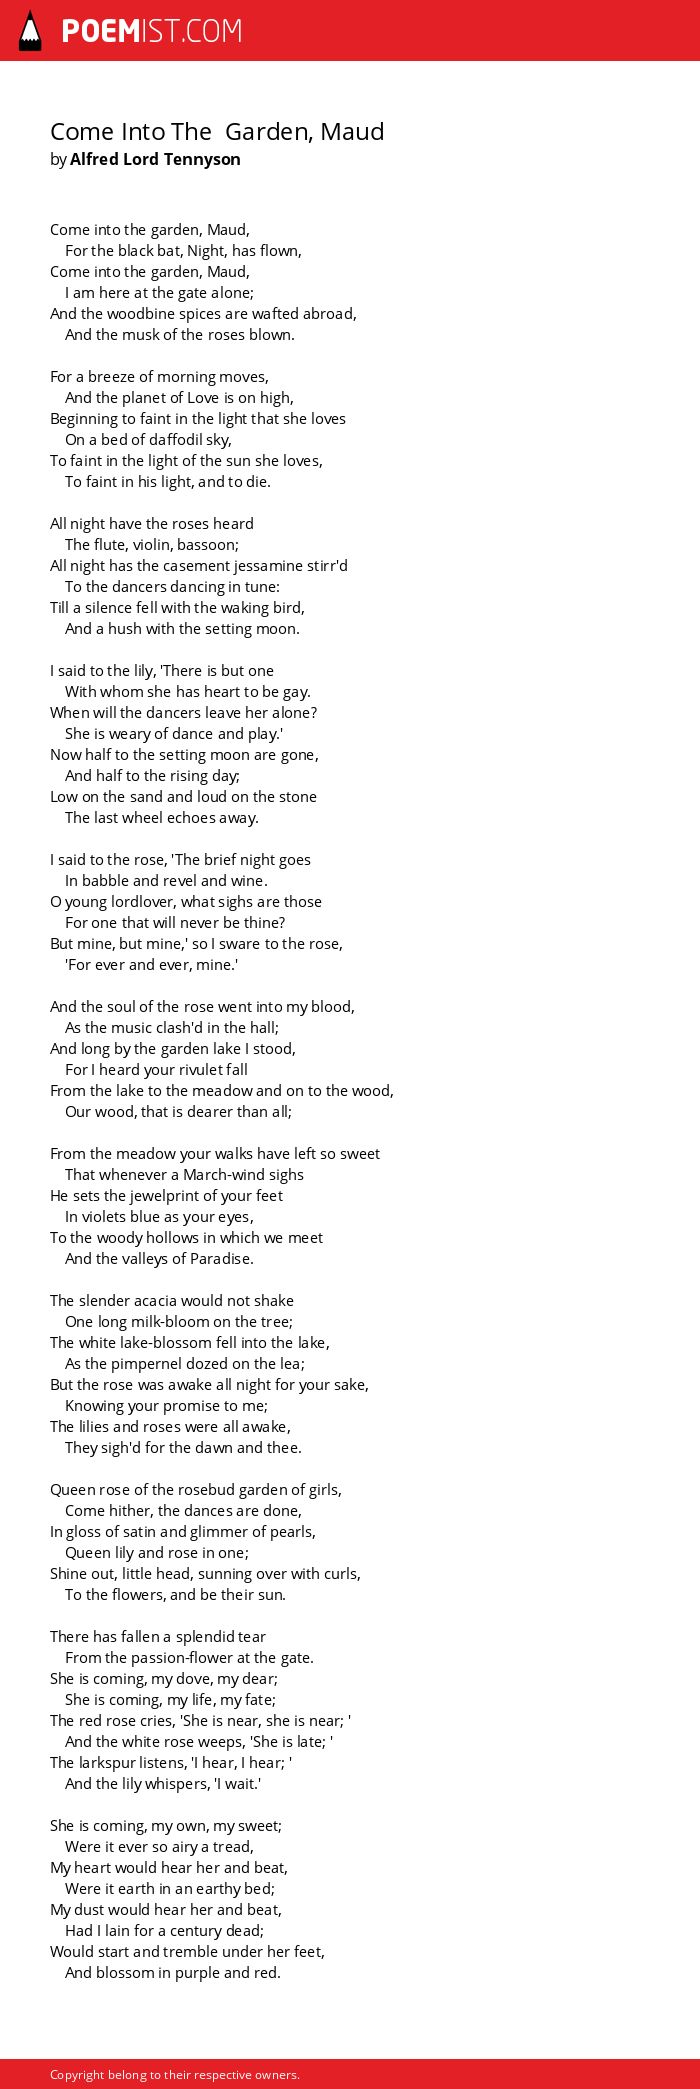 Come Into The Garden Maud By Alfred Lord Tennyson Poemist